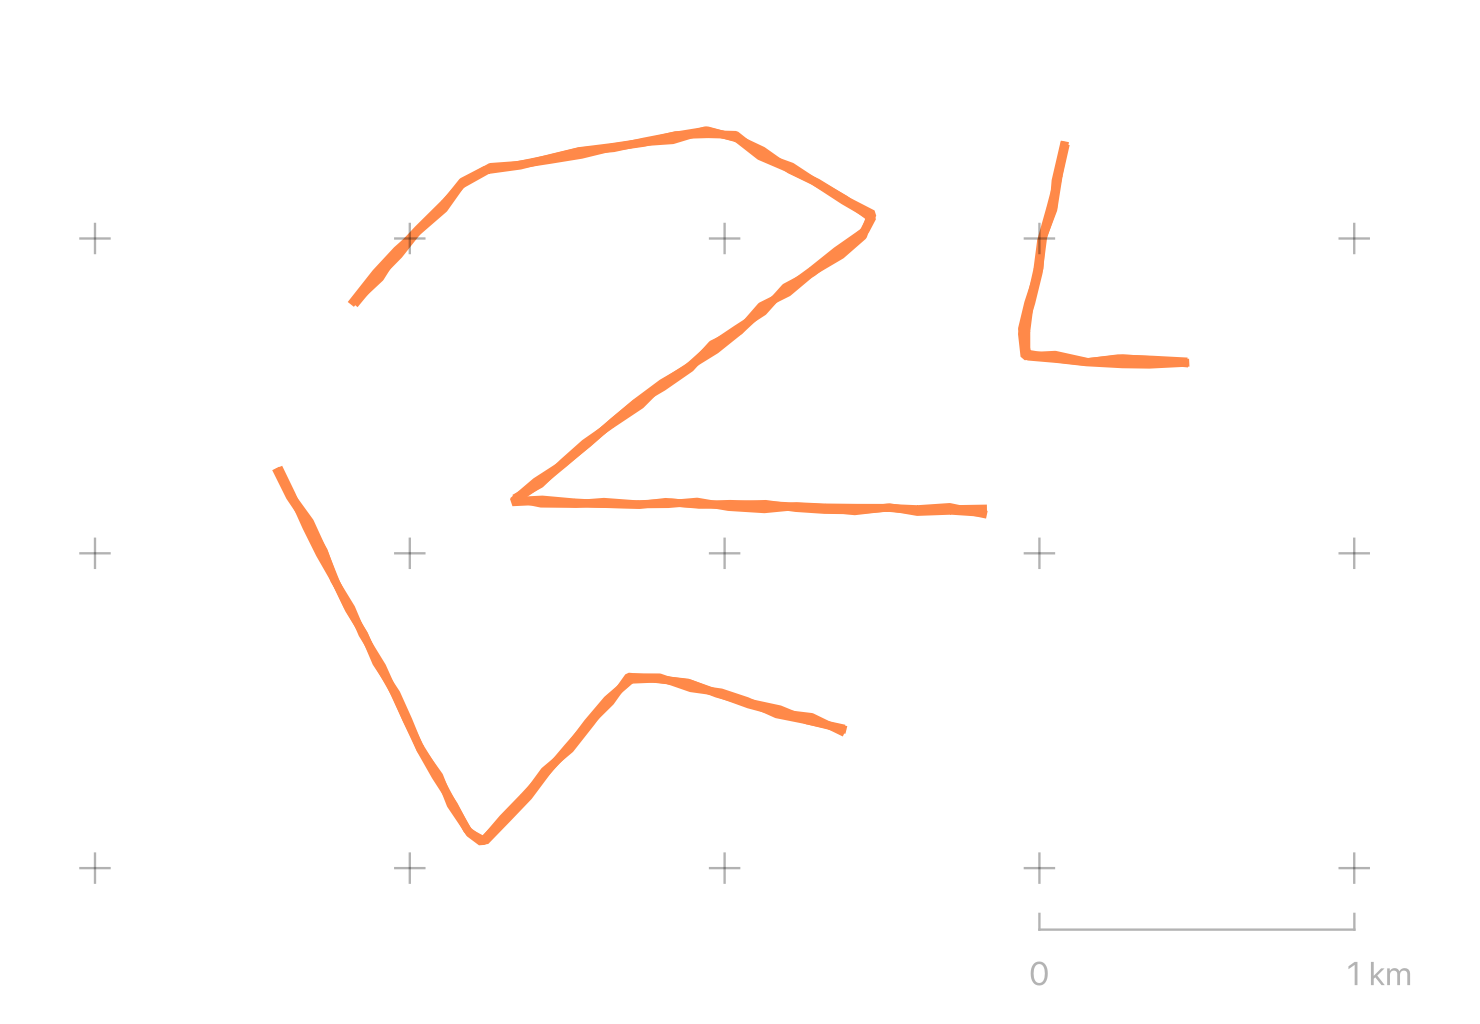 Lines with mutliple randomised symbols giving a drawn effect